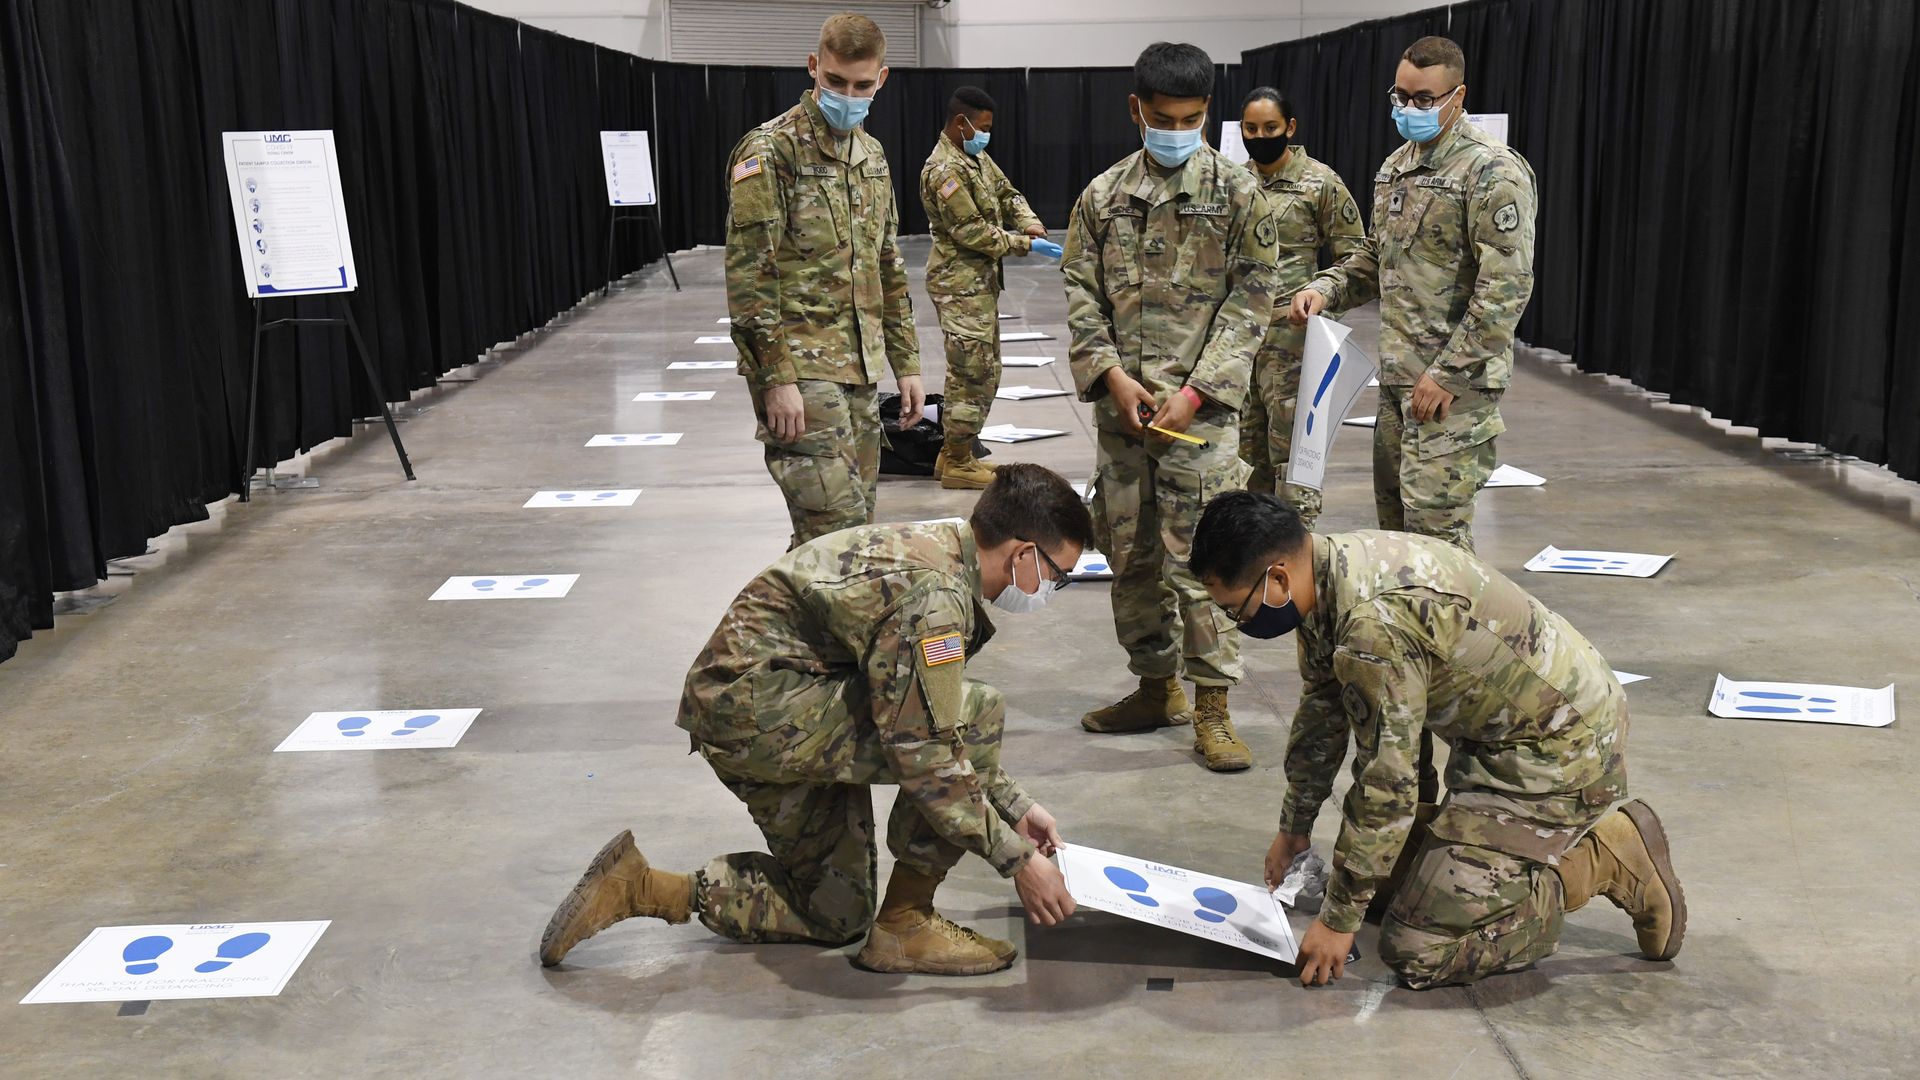  Members of the Nevada National Guard put down social distancing decals at a new coronavirus (COVID-19) testing site inside Cashman Center on August 3, 2020 in Las Vegas, Nevada. 